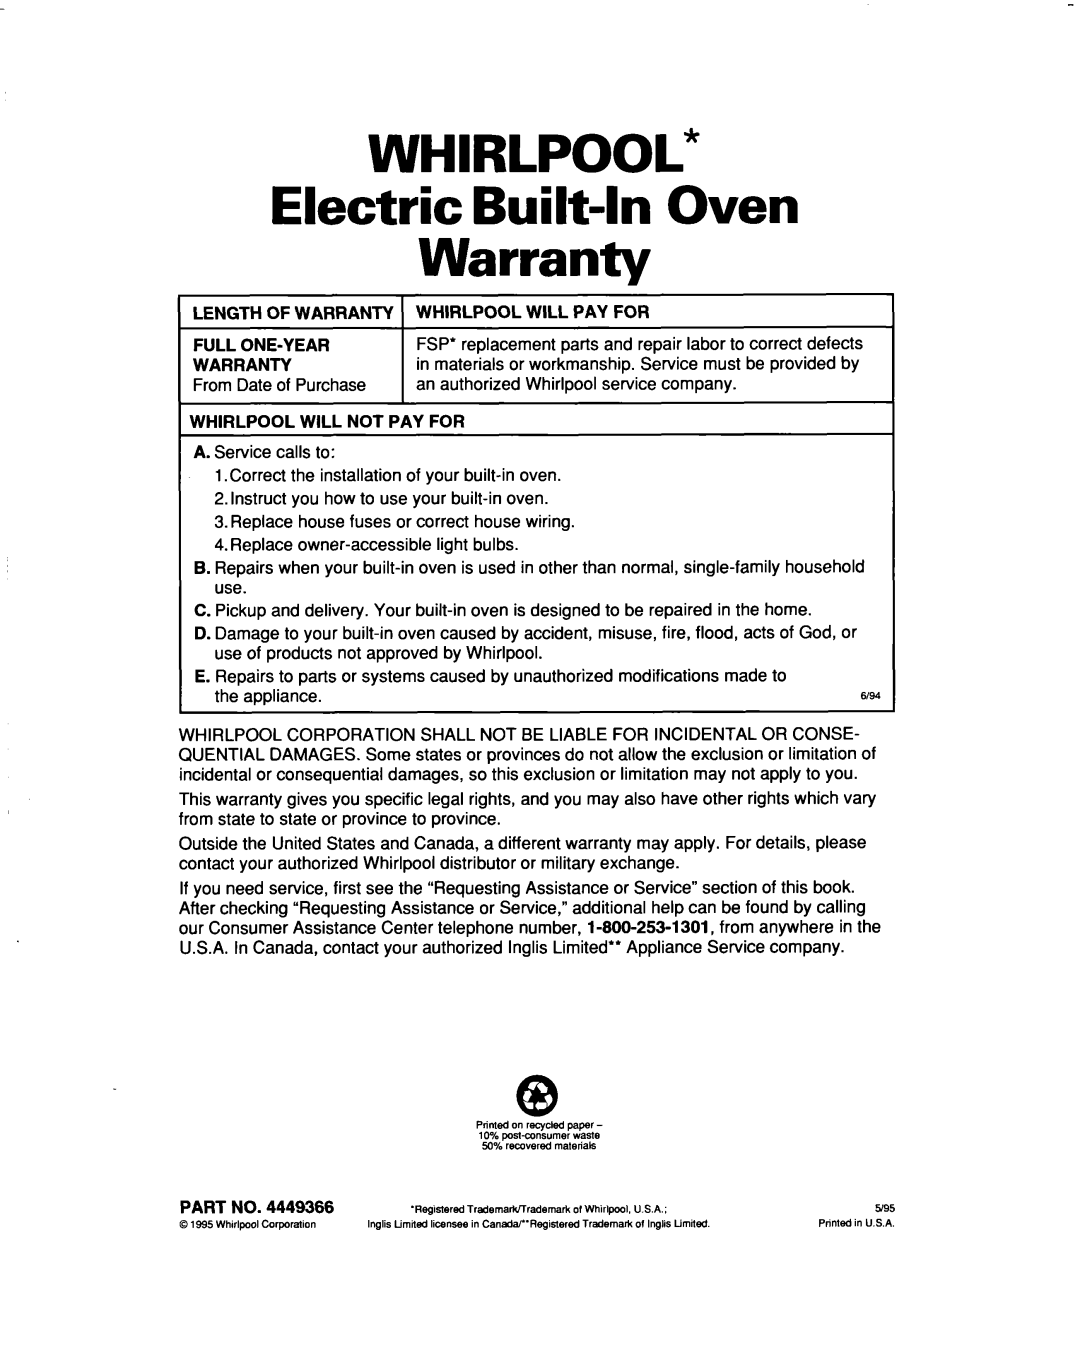 Whirlpool RBS307PD WHIRLPOOL Electric Built-InOven Warranty, LENGTH OF WARRANTY 1 WHIRLPOOL WILL PAY FOR, Full One-Year 